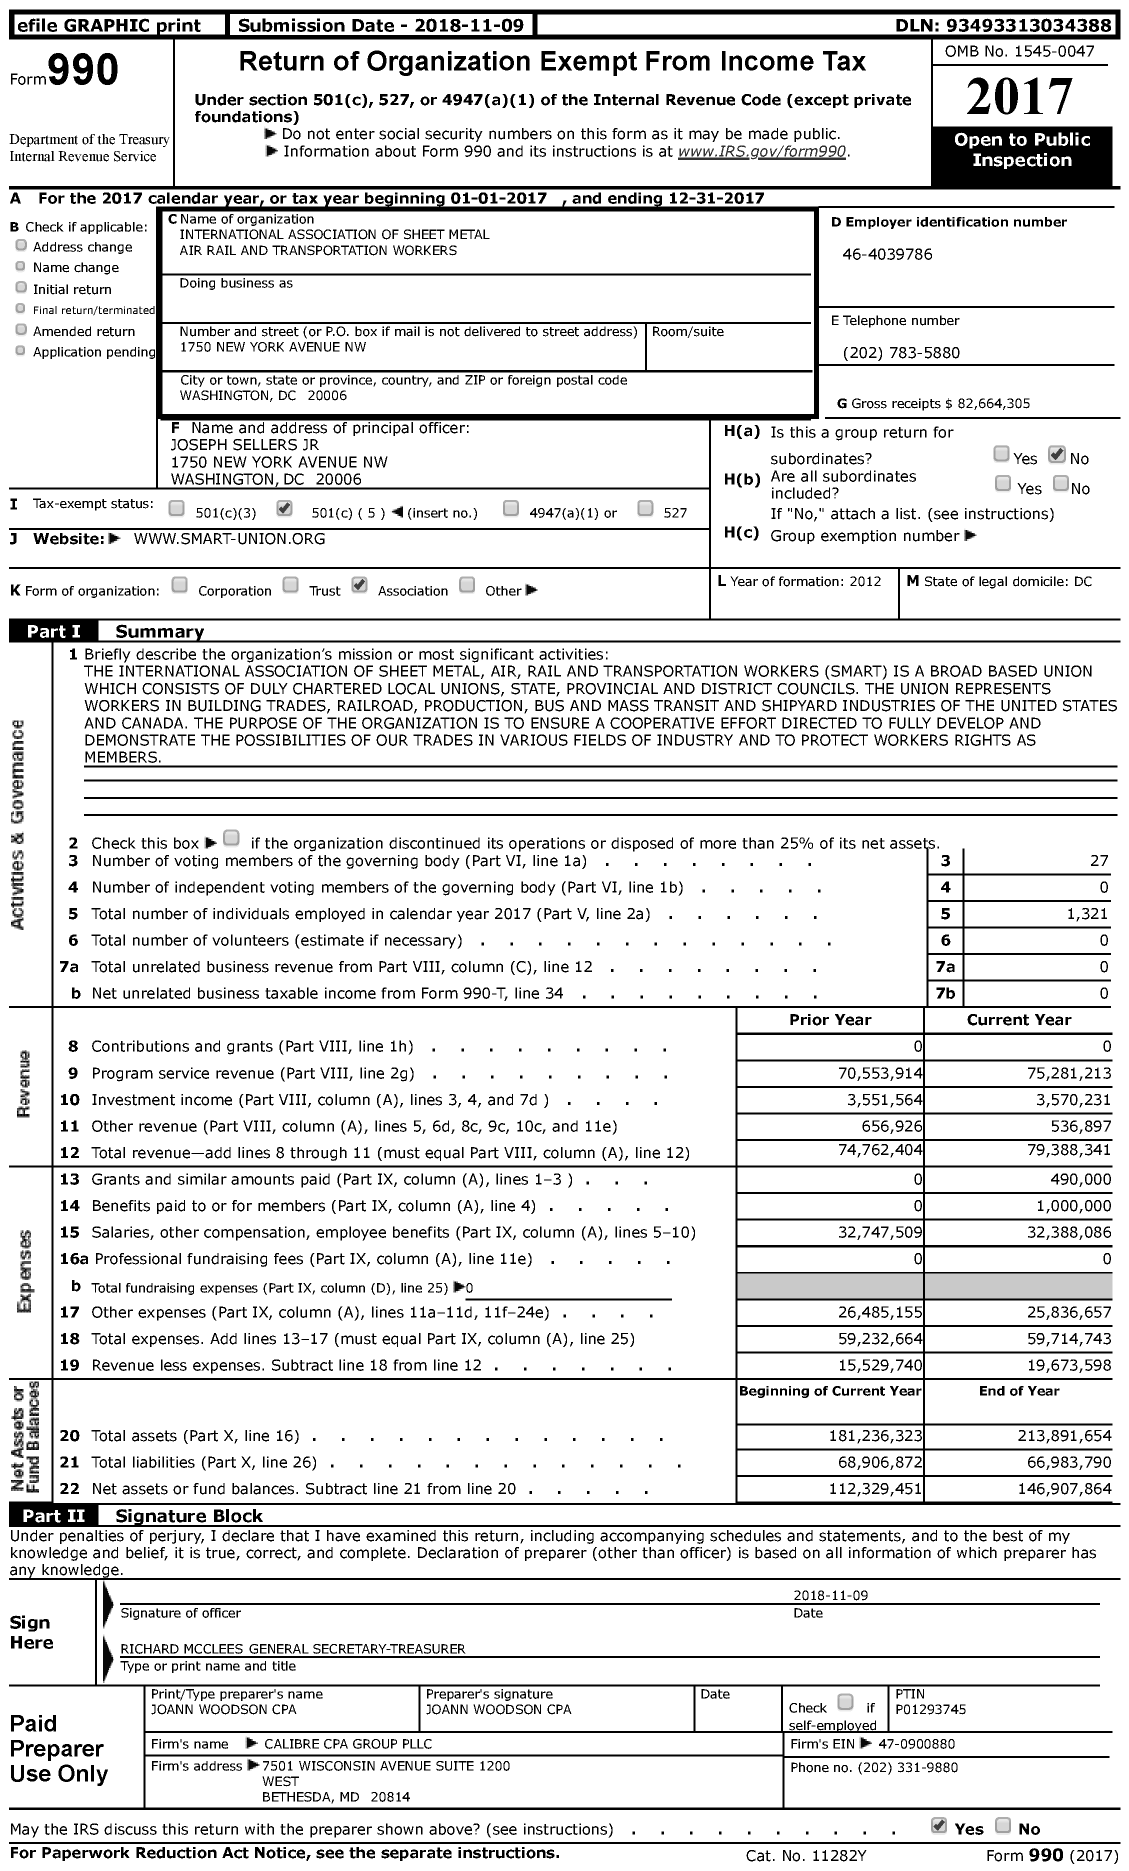 Image of first page of 2017 Form 990 for International Association of Sheet Metal Air Rail and Transportation Workers (SMART)